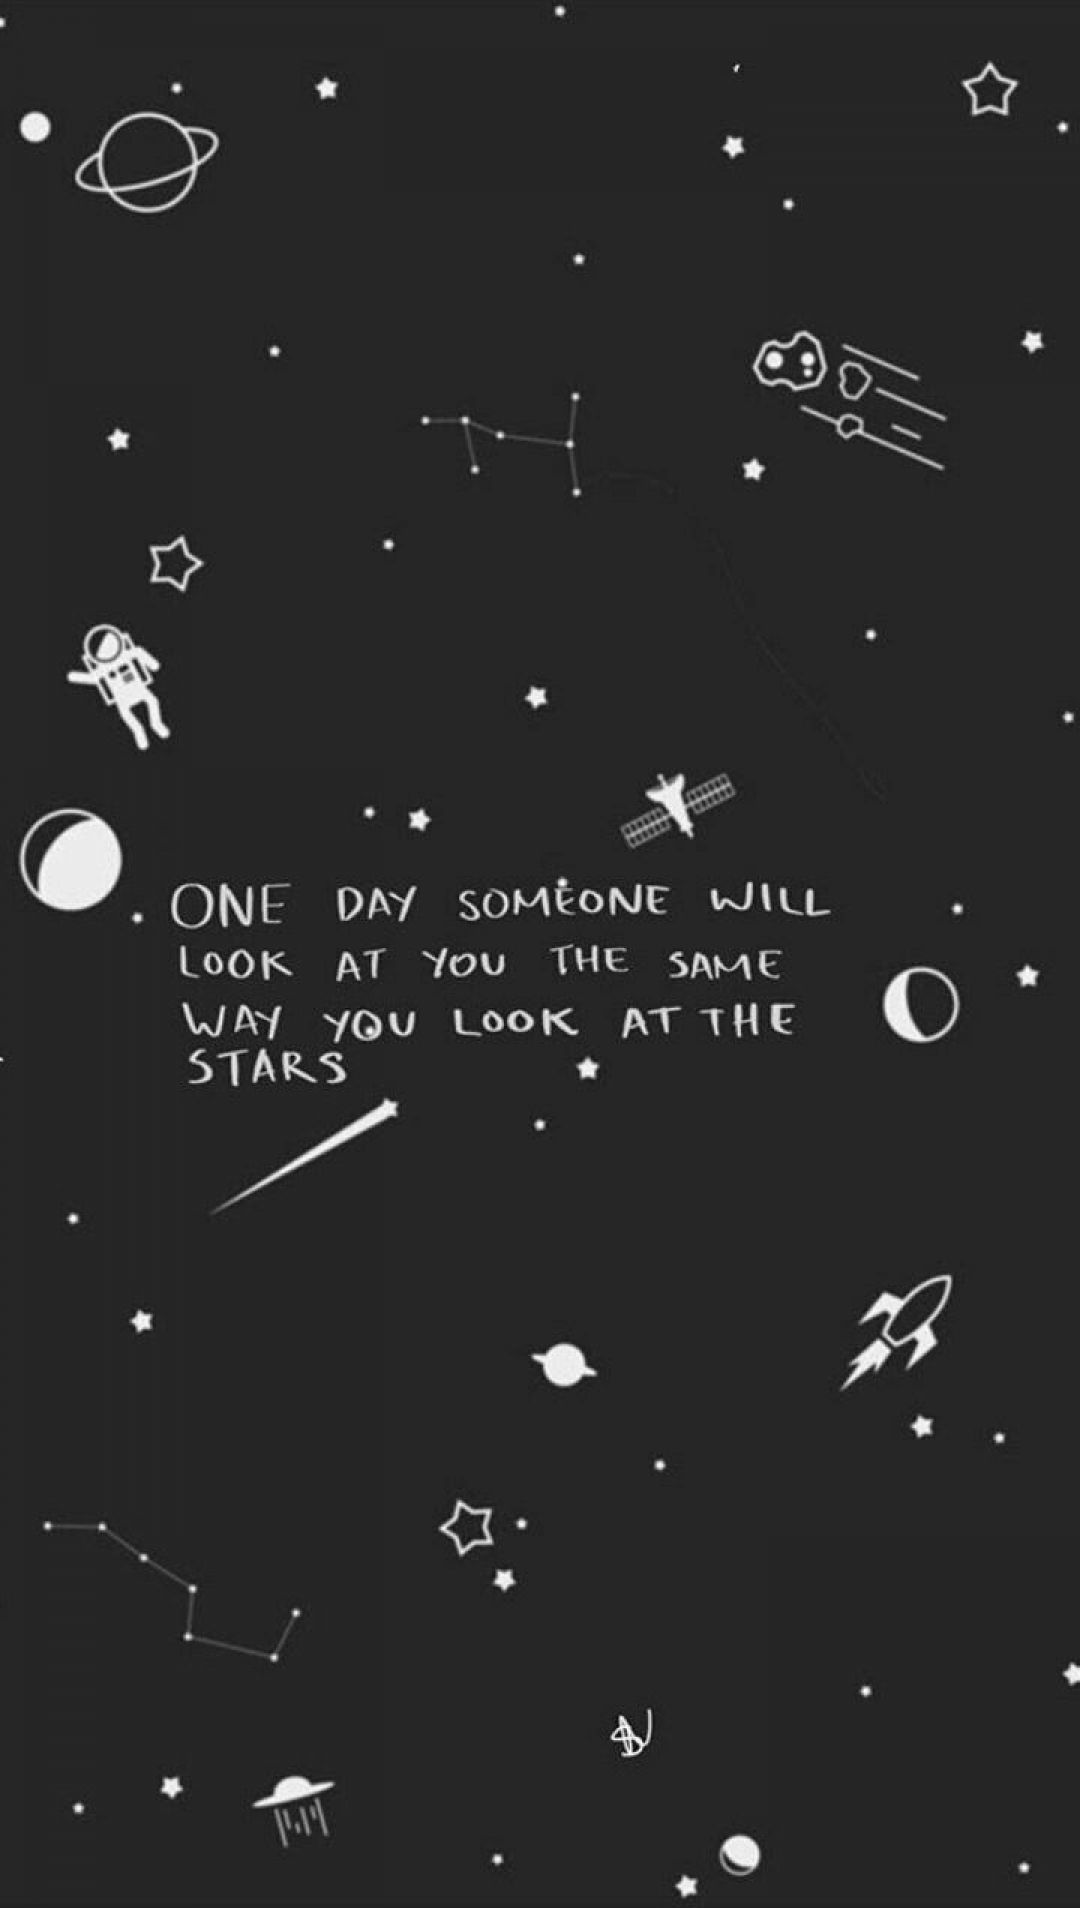 Black aesthetic wallpaper for phone with stars, planets, and an astronaut. - Space